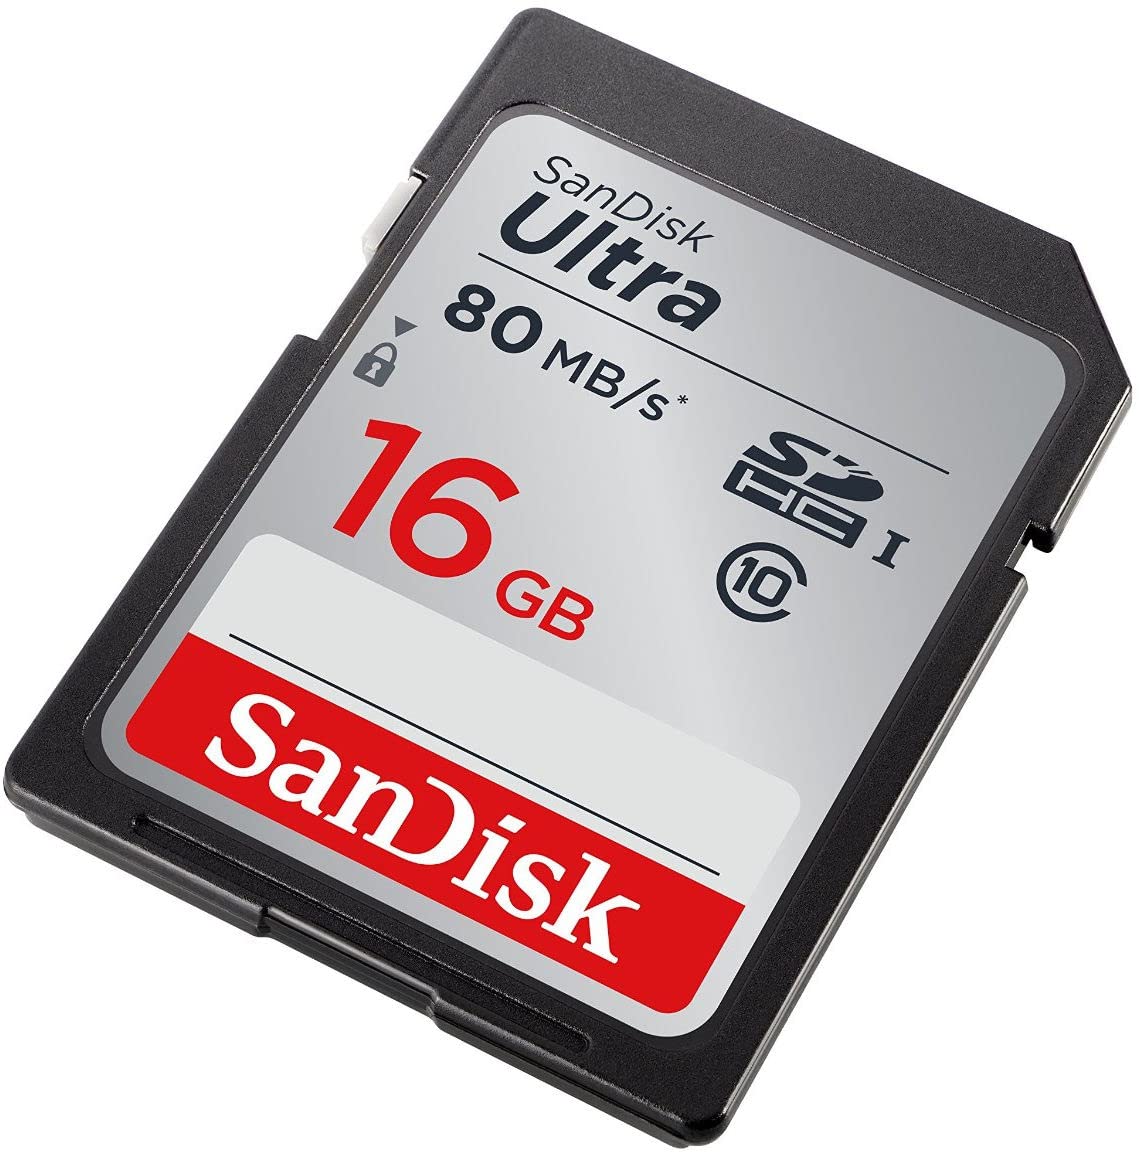 Sandisk ULTRA SD Class 10 Card - 80 MBPS 16GB